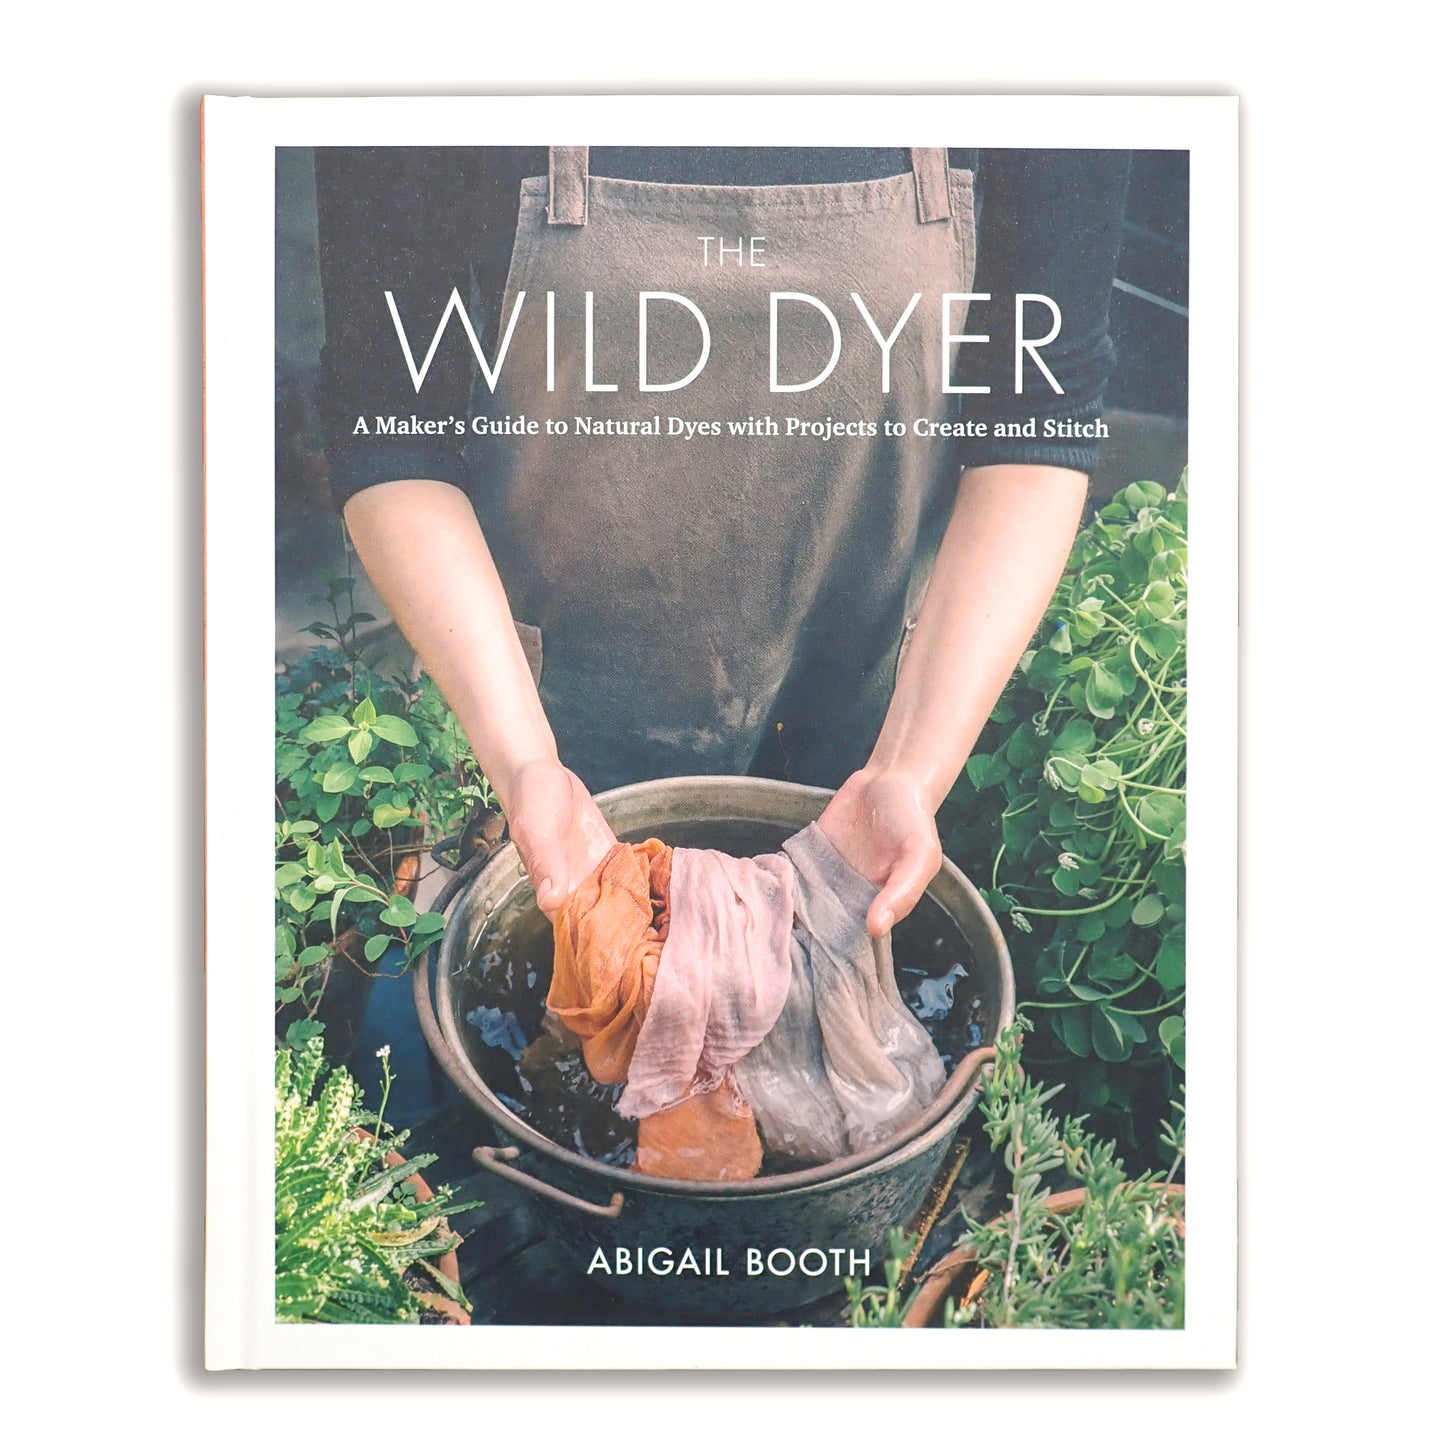 The Wild Dyer A Maker’s Guide to Natural Dyes with Projects to Create and Stitch - Abigail Booth